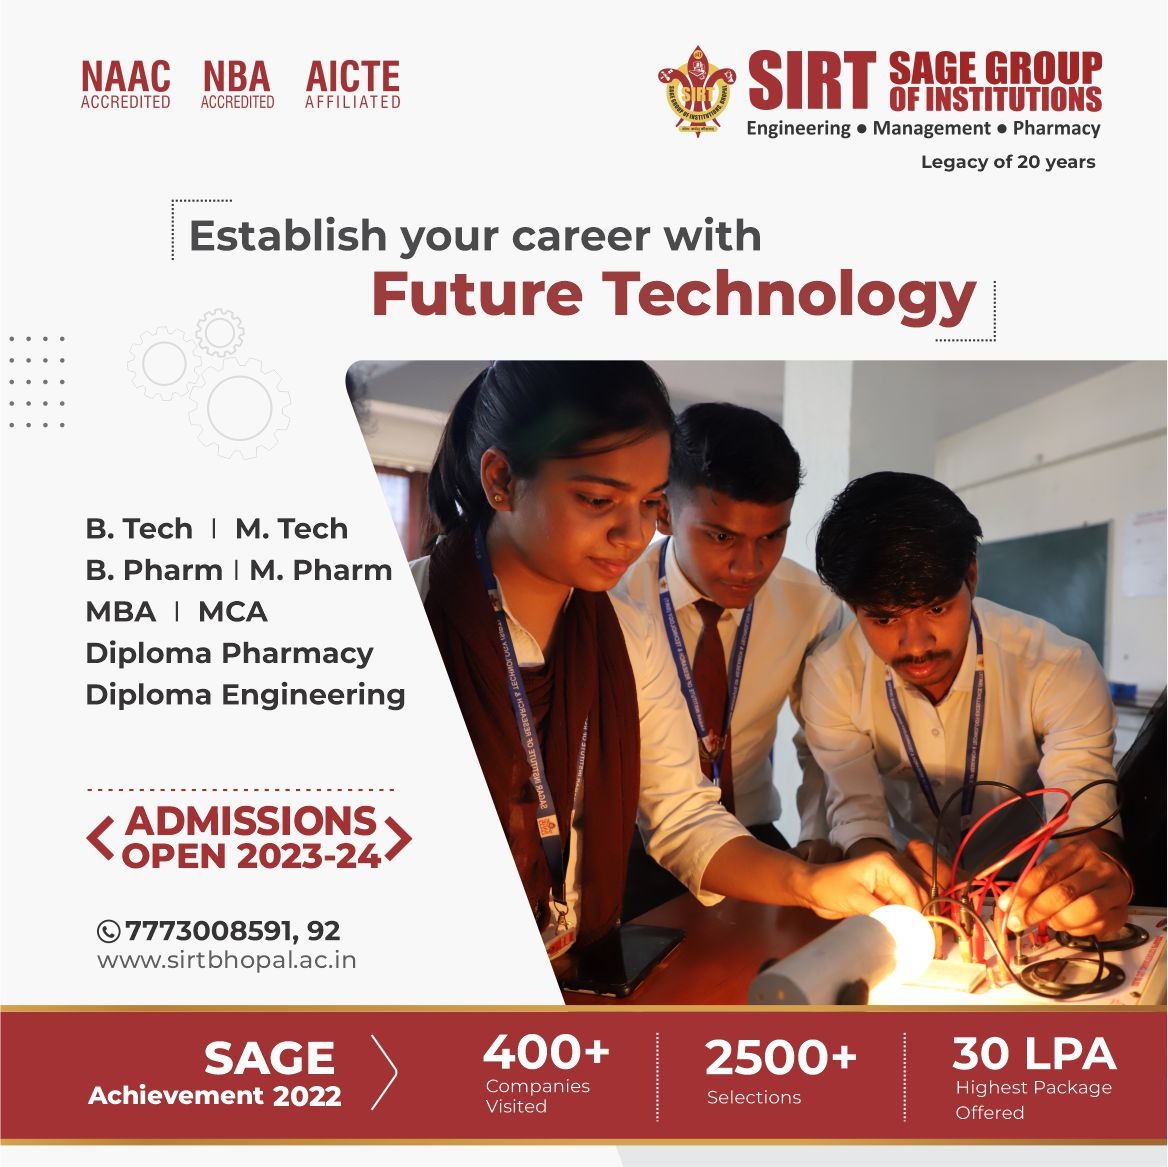 @SageUniBhopal Admission Open 2023-24. 

Visit
sirtbhopal.ac.in
For more details. 
#sirt_bhopal 
#bestengineeringcollege 
@AgrawalSanjeev4 @Shivani130295 @SakshiAgrawal05